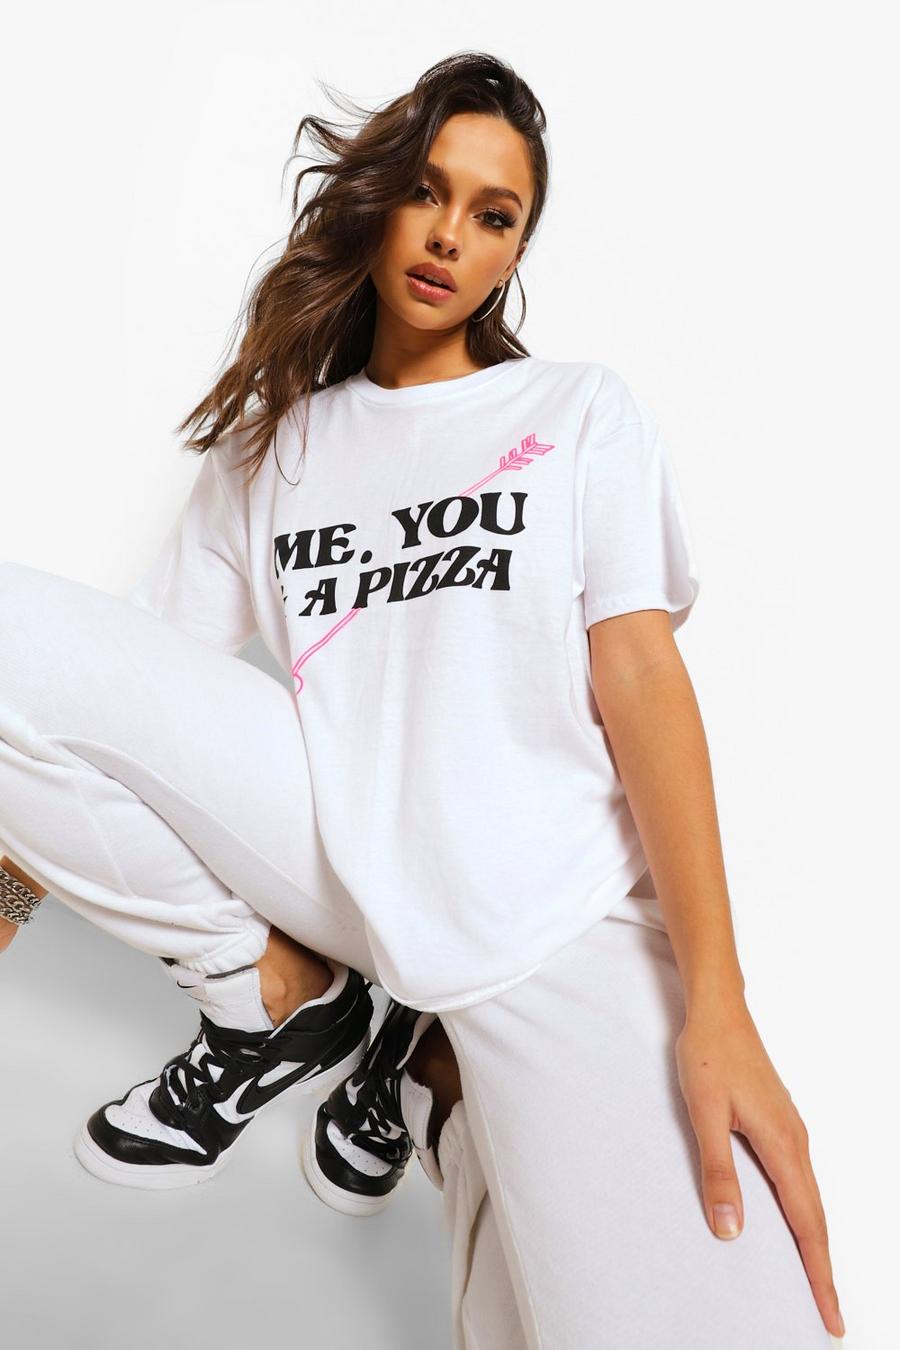 Camiseta con eslogan “Me You And Pizza” Tall, Blanco image number 1